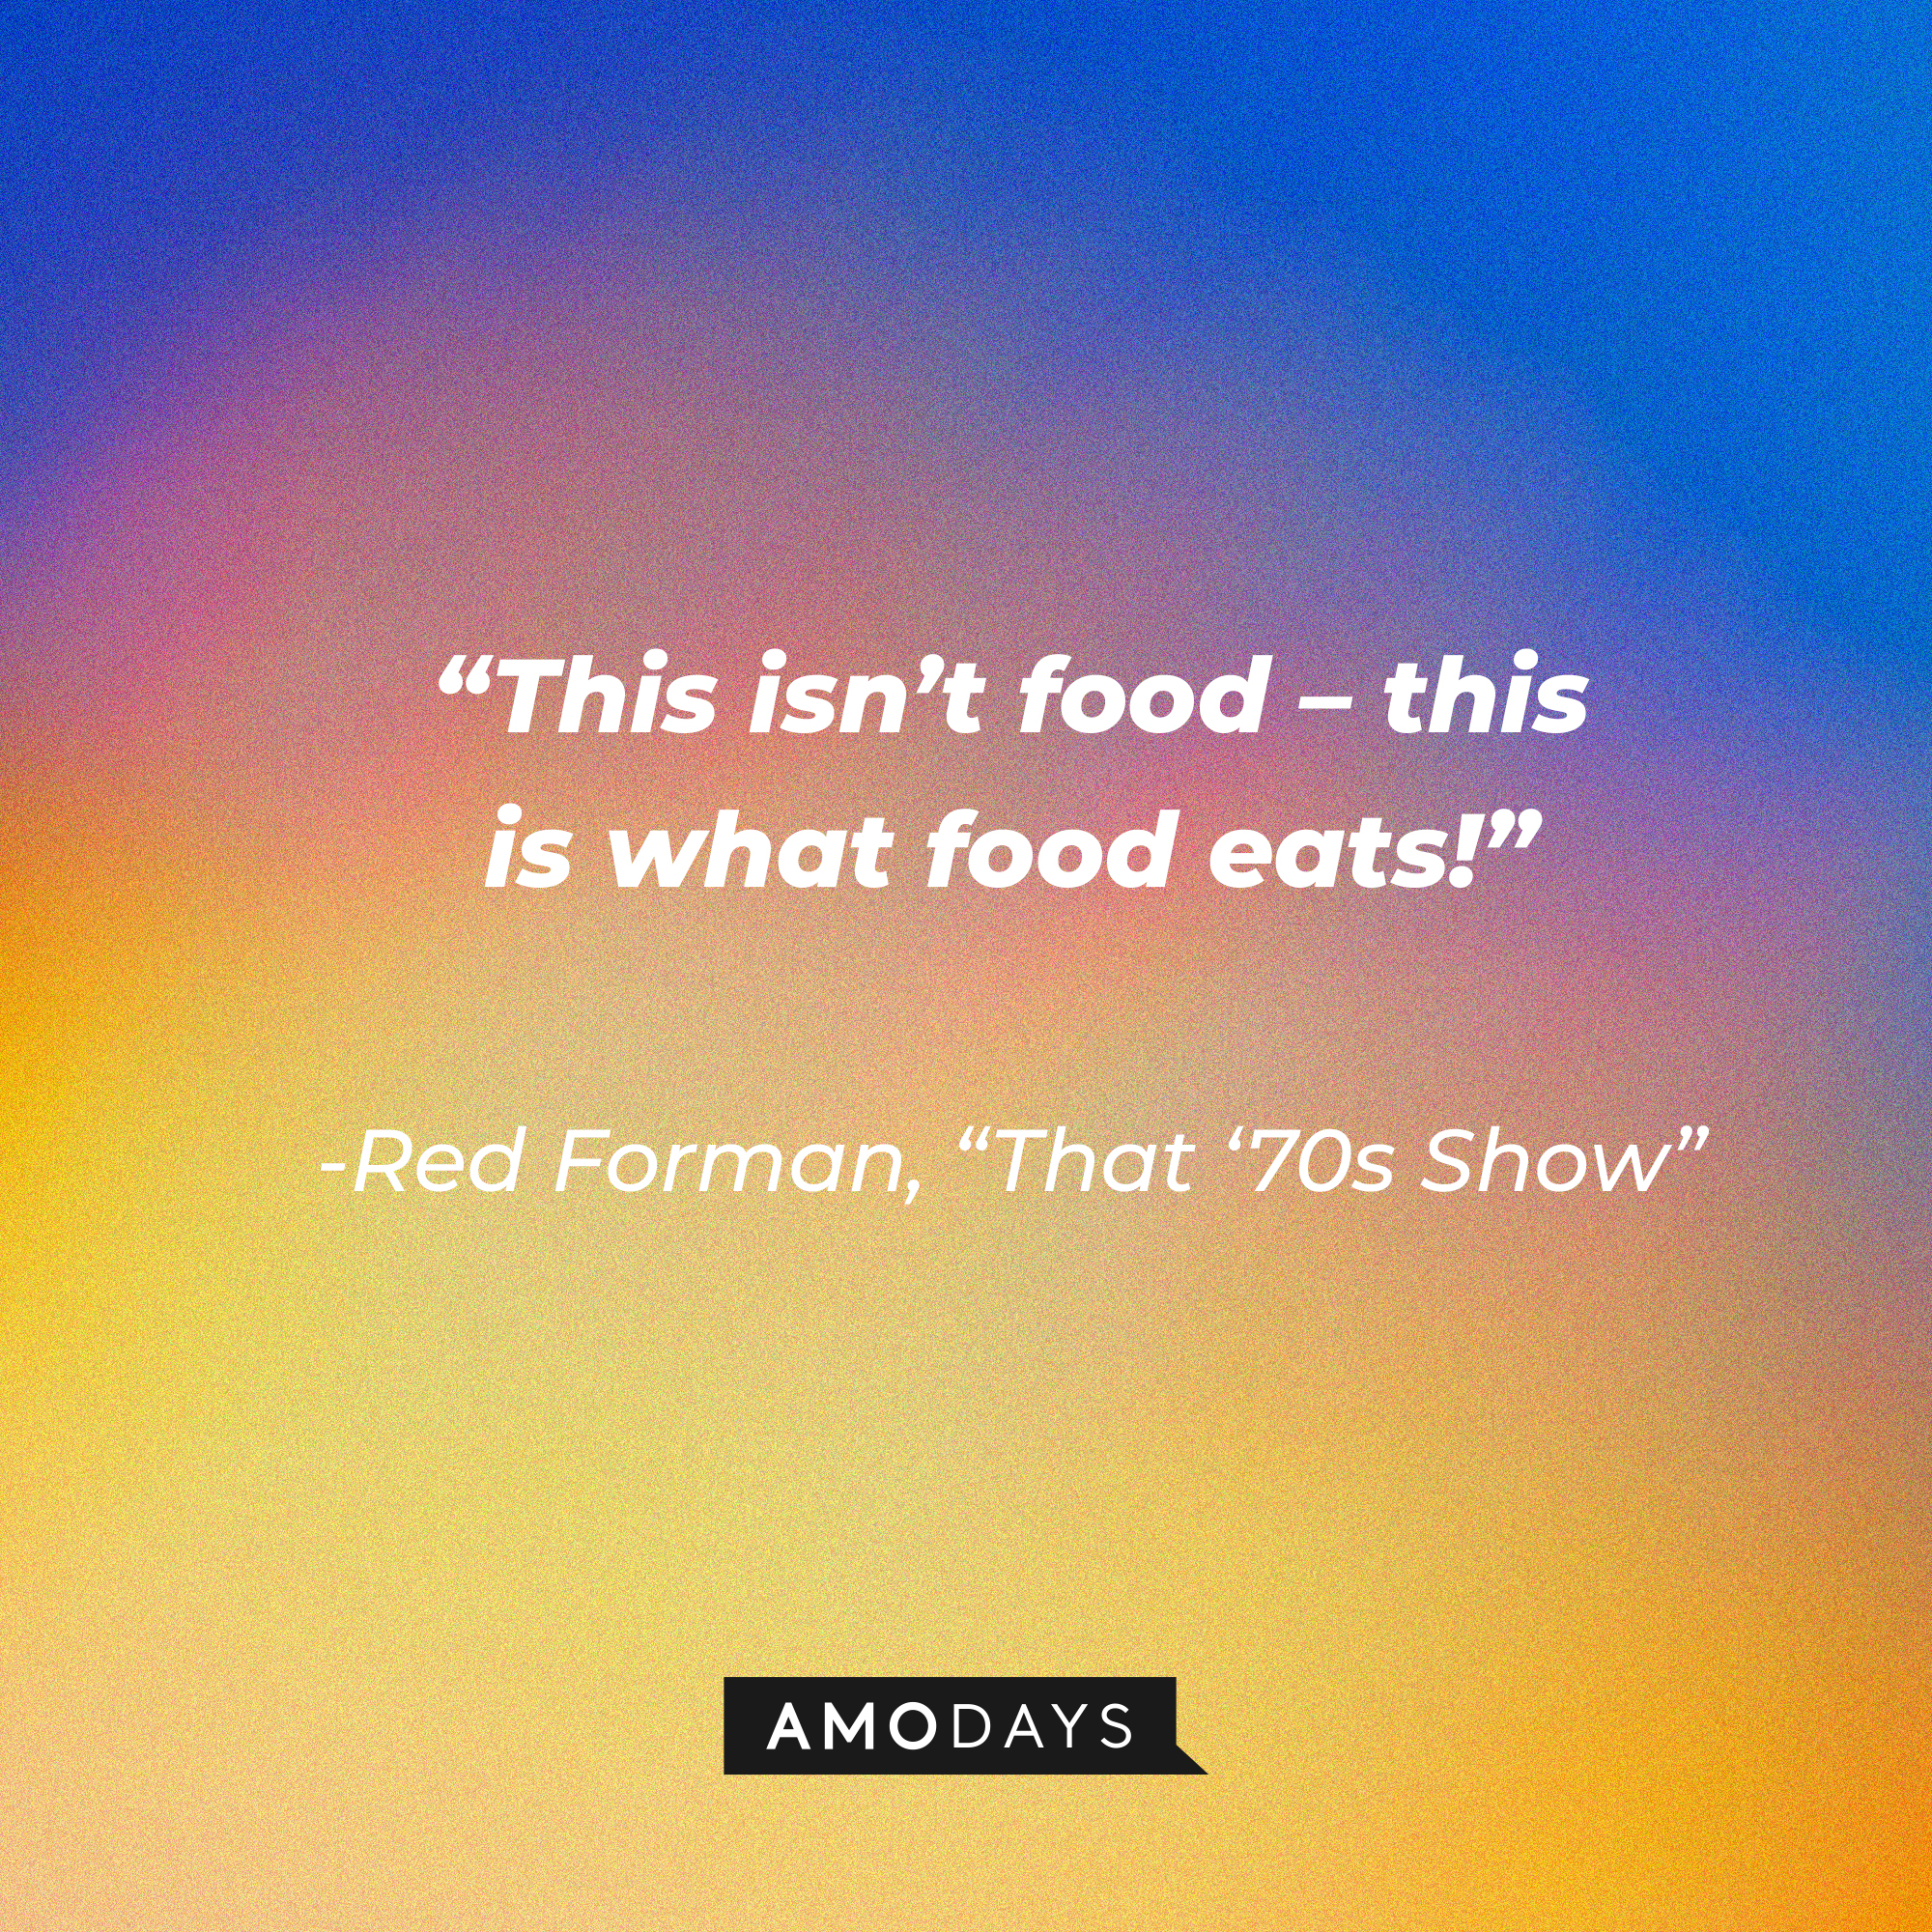 Red Forman's quote from "That '70s Show:" “This isn’t food – this is what food eats!" | Source: AmoDays